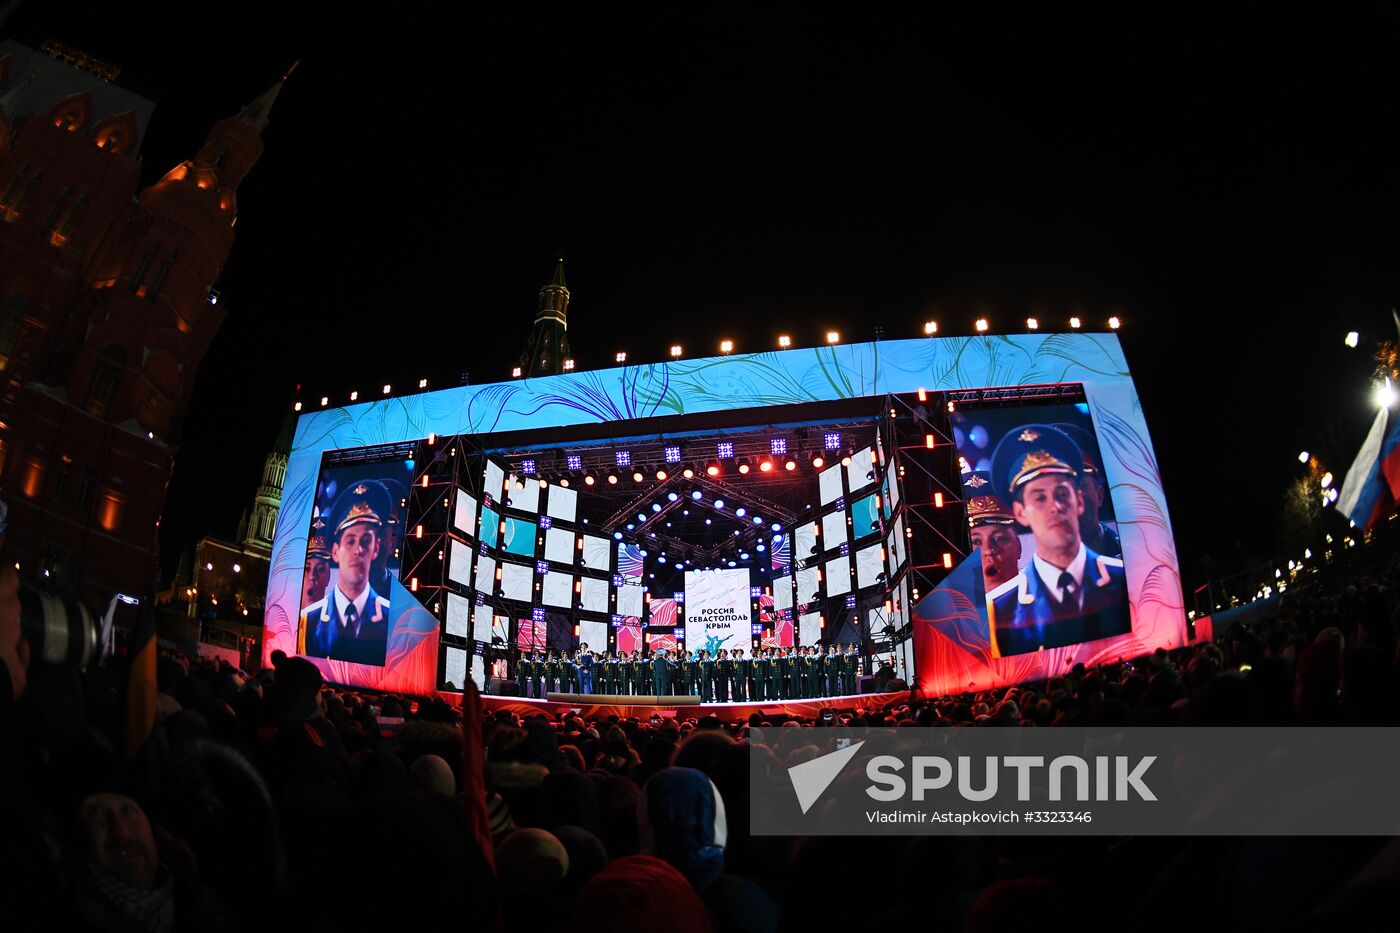 Meeting and concert in Moscow to mark anniversary of Crimea's reunification with Russia